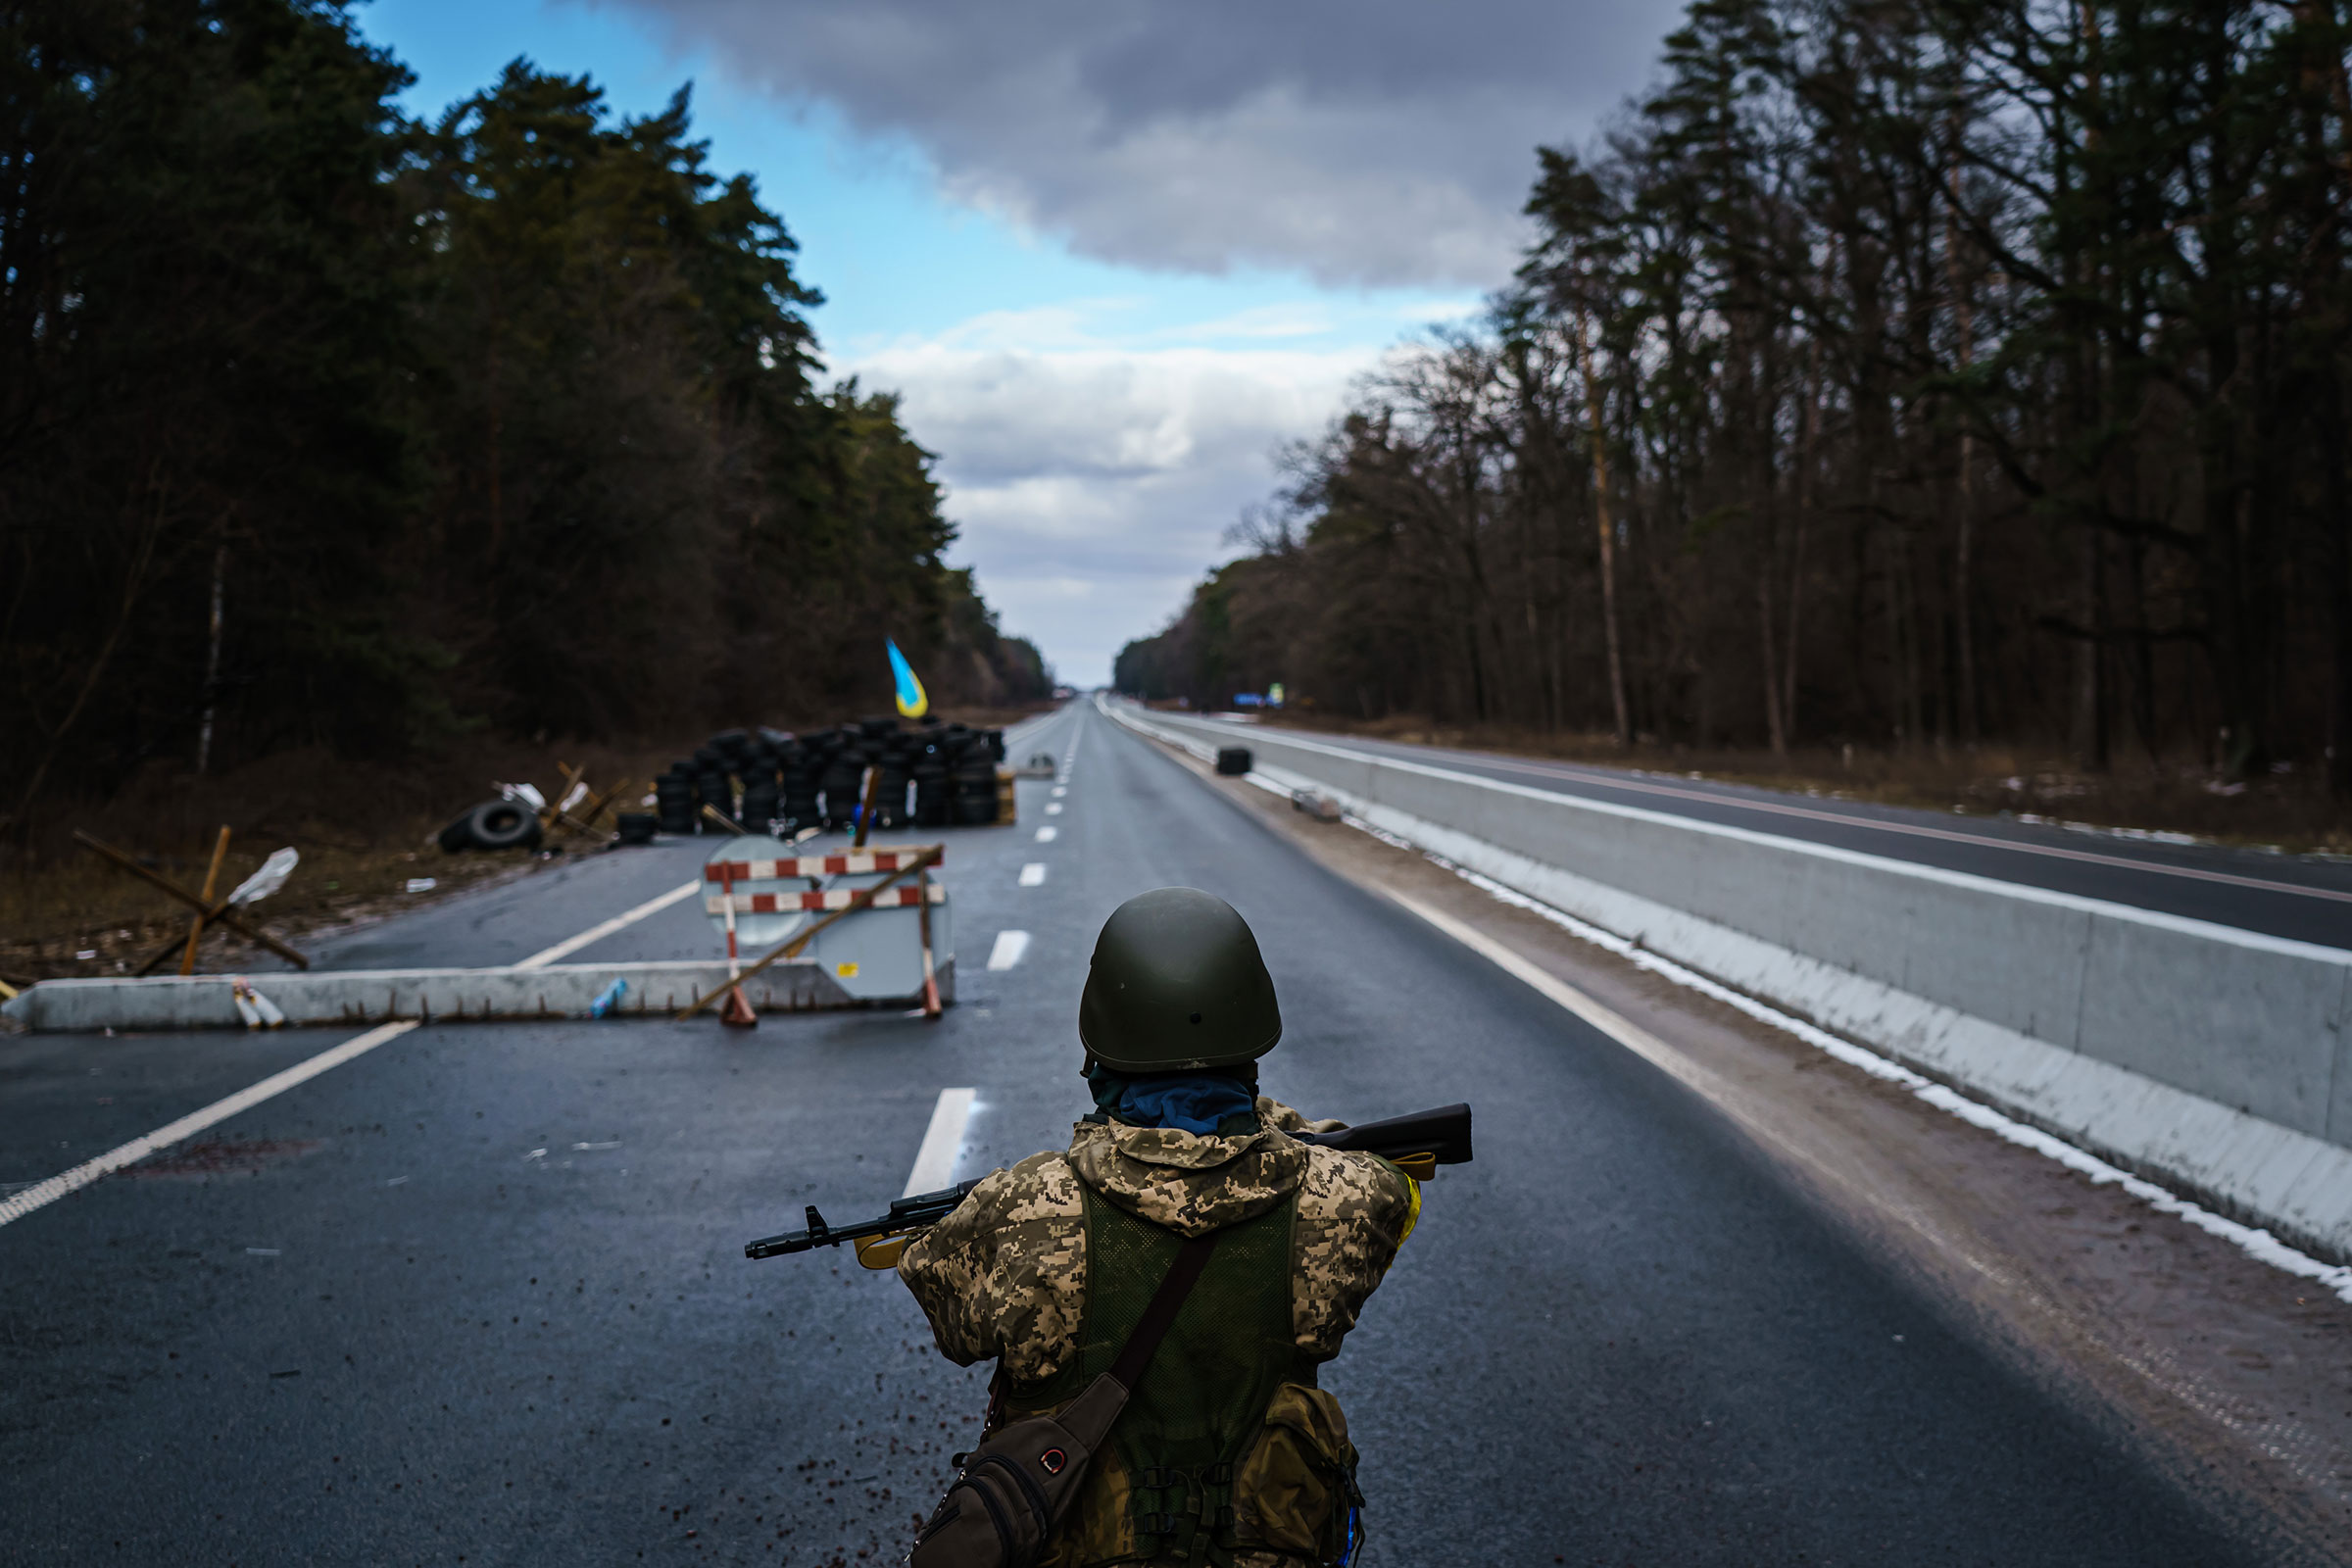 Soldiers arrive to reinforce one of the final checkpoints before the frontlines where Ukrainian forces are battling invading Russian forces near Brovary, Ukraine, on March 8, 2022. (Marcus Yam—Los Angeles Times/Getty Images)